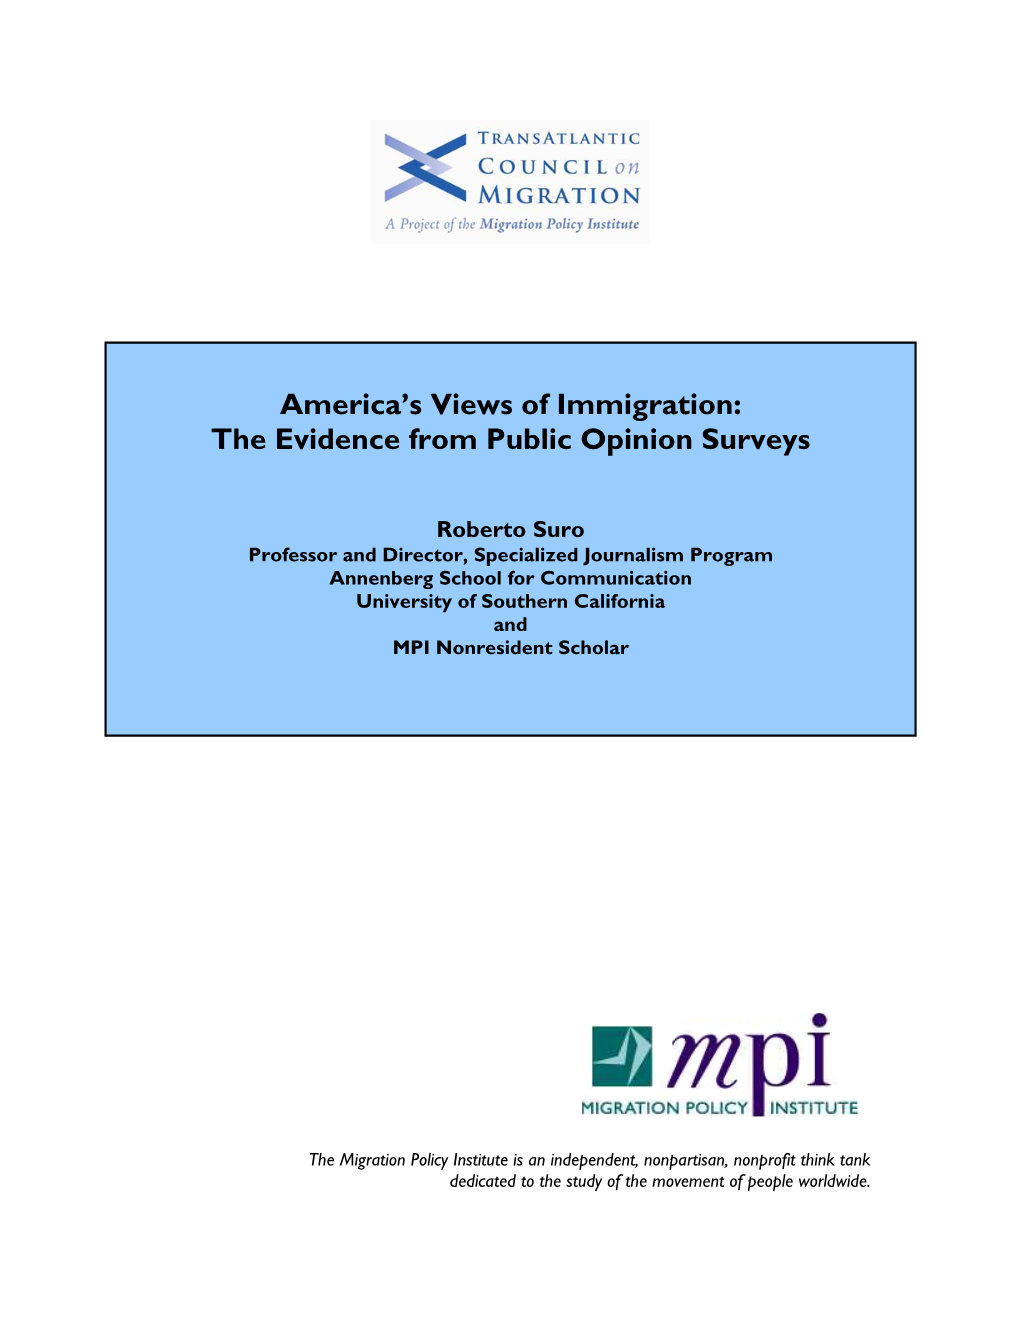 America's Views of Immigration: the Evidence from Public Opinion